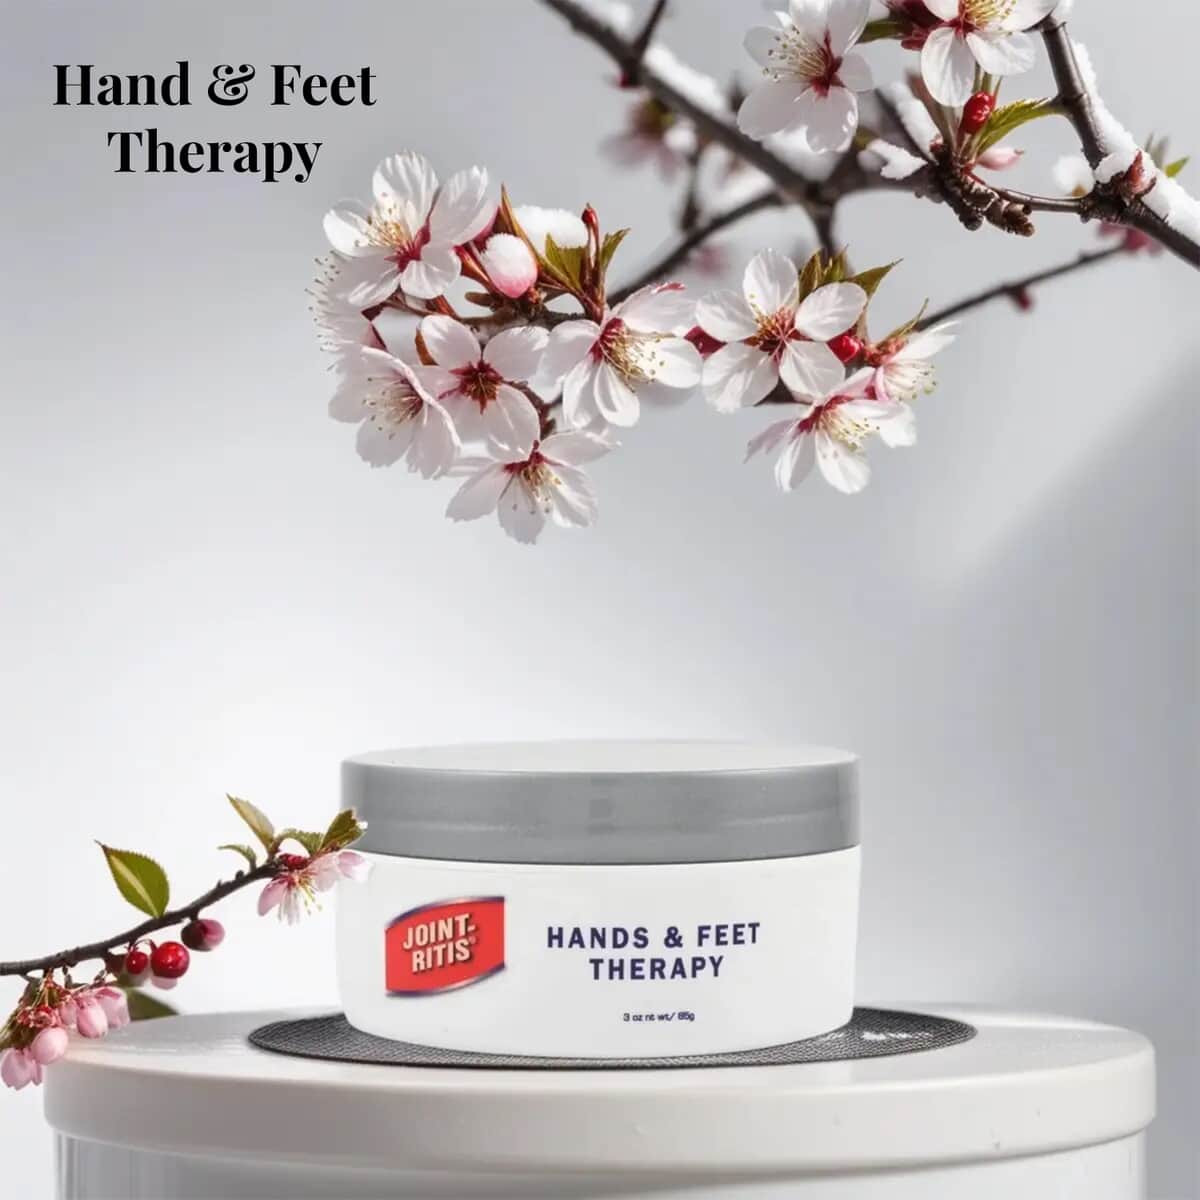 Joint-Ritis Hand & Feet Therapy Hand Foot Pain Reliever Cream For Muscle Pain, Paraben & Silicone Free Cream With Natural Ingredients (50ml) 3 oz image number 1